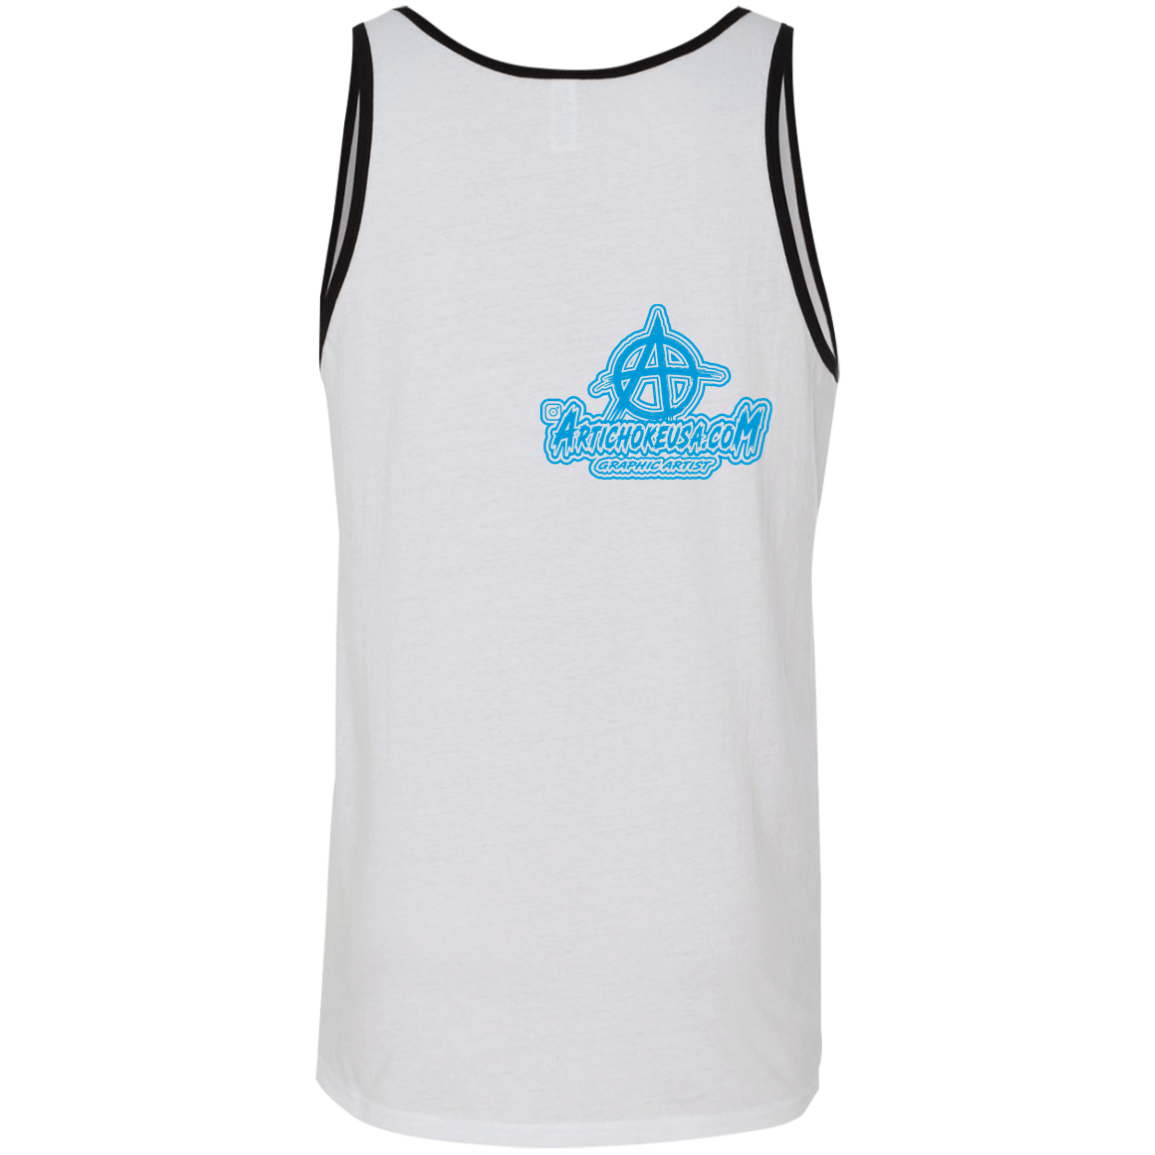 ArtichokeUSA Character and Font design. Let's Create Your Own Team Design Today. My first client Charles. Unisex Tank